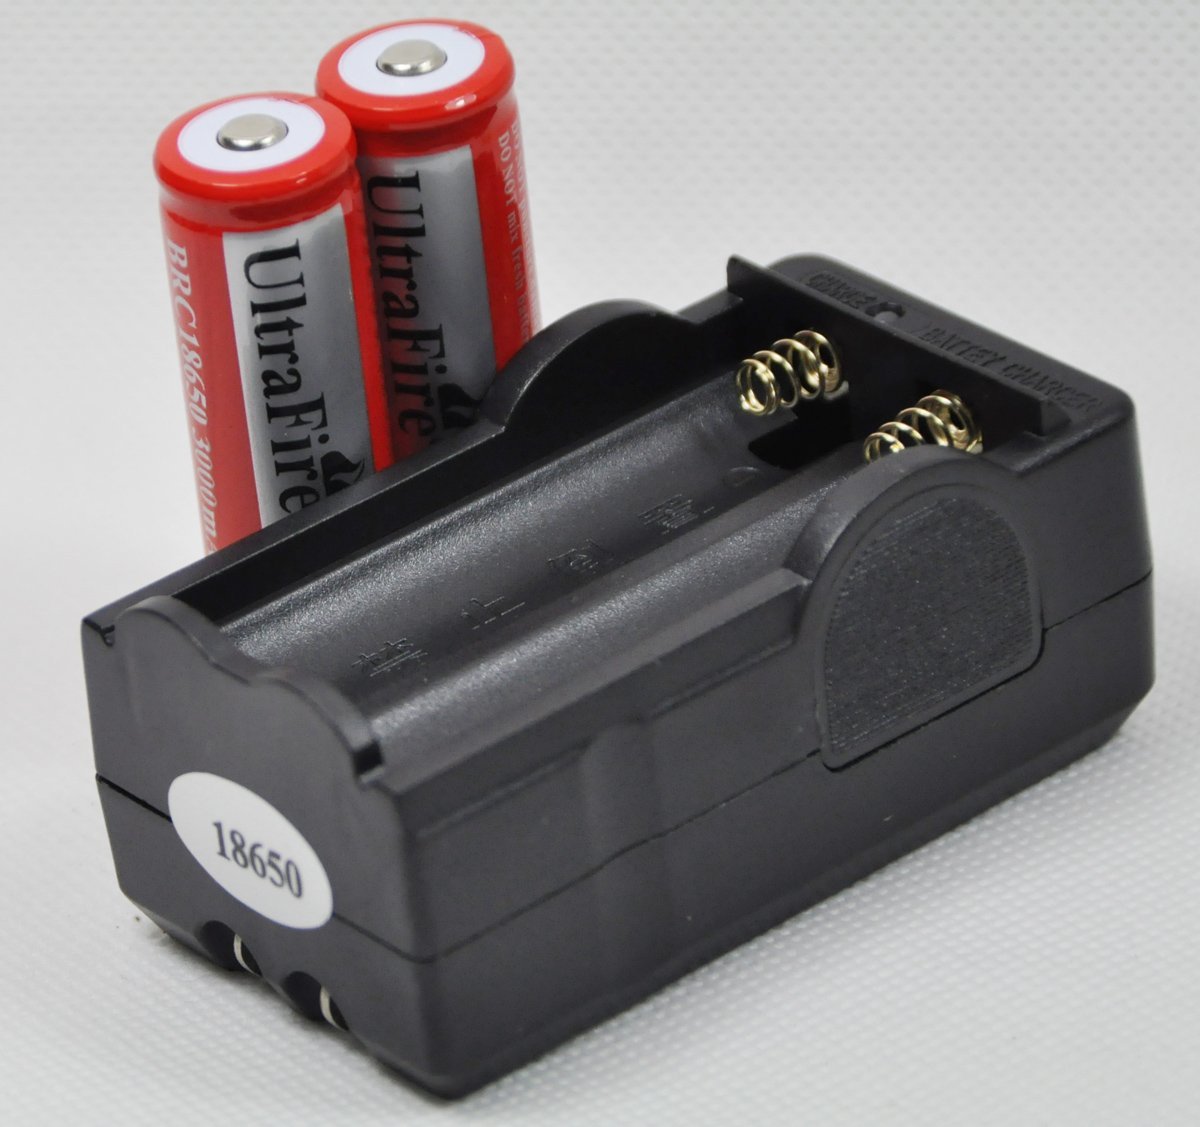 2 Ultrafire 18650 3000mah Li-Ion Rechargeable Protected Batteries + 1 Dual Smart Charger + FREE SHIPPING